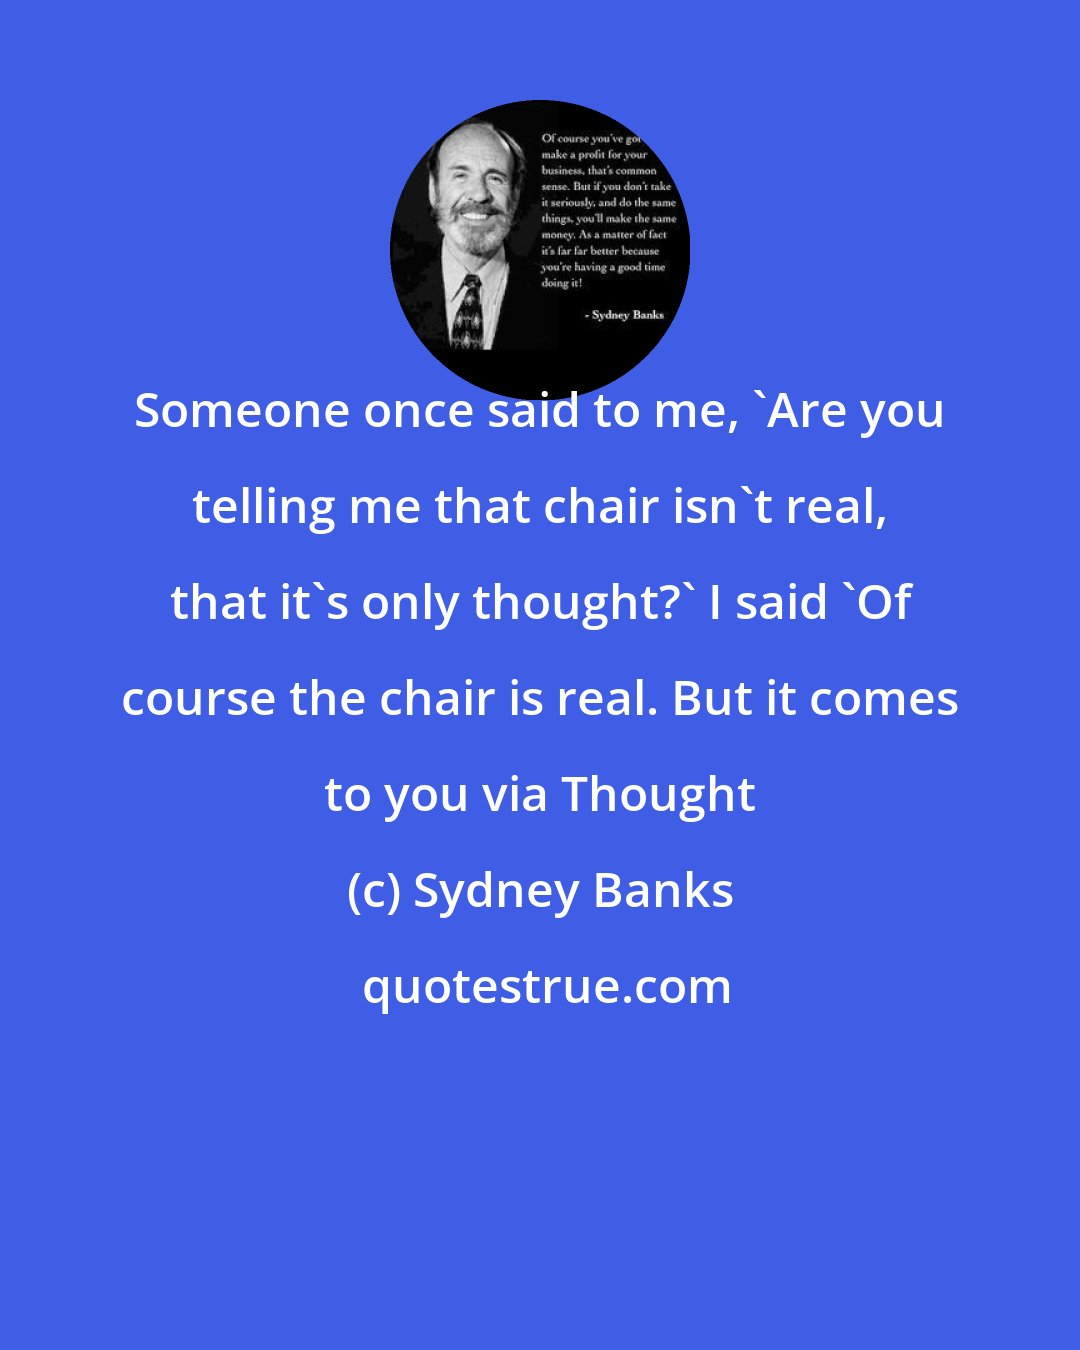 Sydney Banks: Someone once said to me, 'Are you telling me that chair isn't real, that it's only thought?' I said 'Of course the chair is real. But it comes to you via Thought